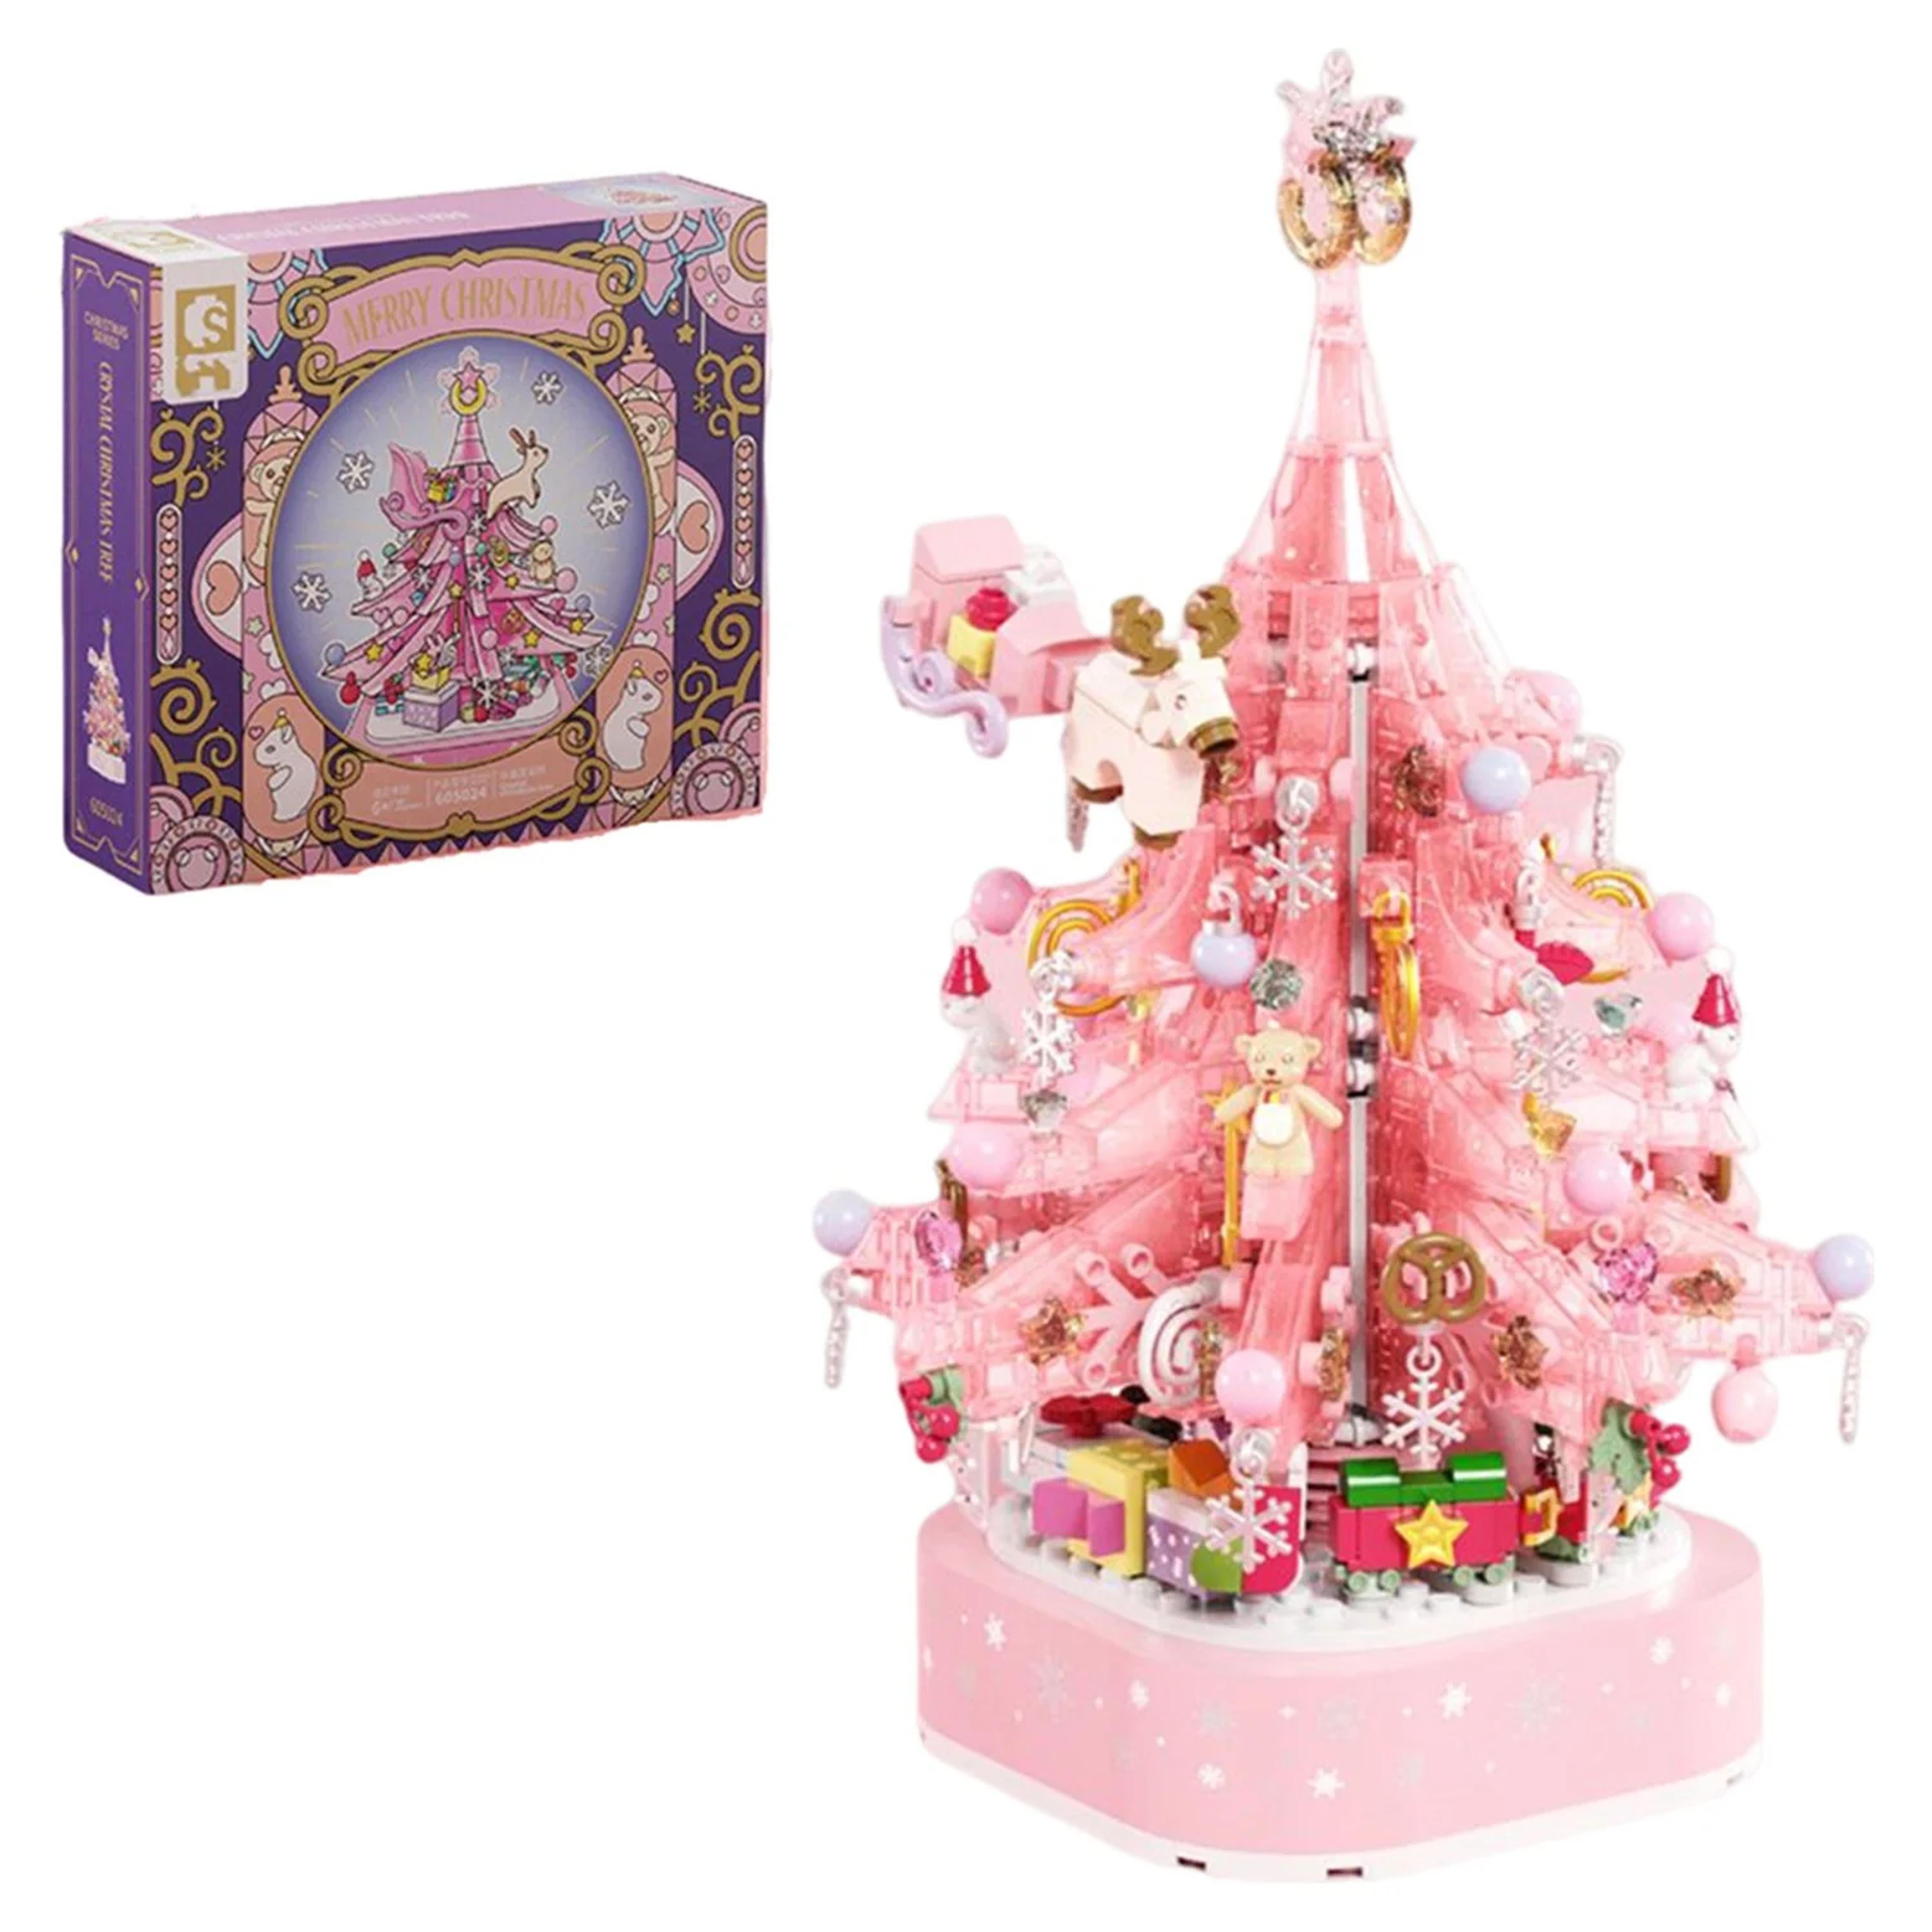 PHENAS Pink Christmas Tree Building Block Kits 675 Pieces for Kids - DIY Building Block Music Box, Christmas Gift Educational Learning Science Building Kit for 8+ Year Old Boys Girls - Walmart.com